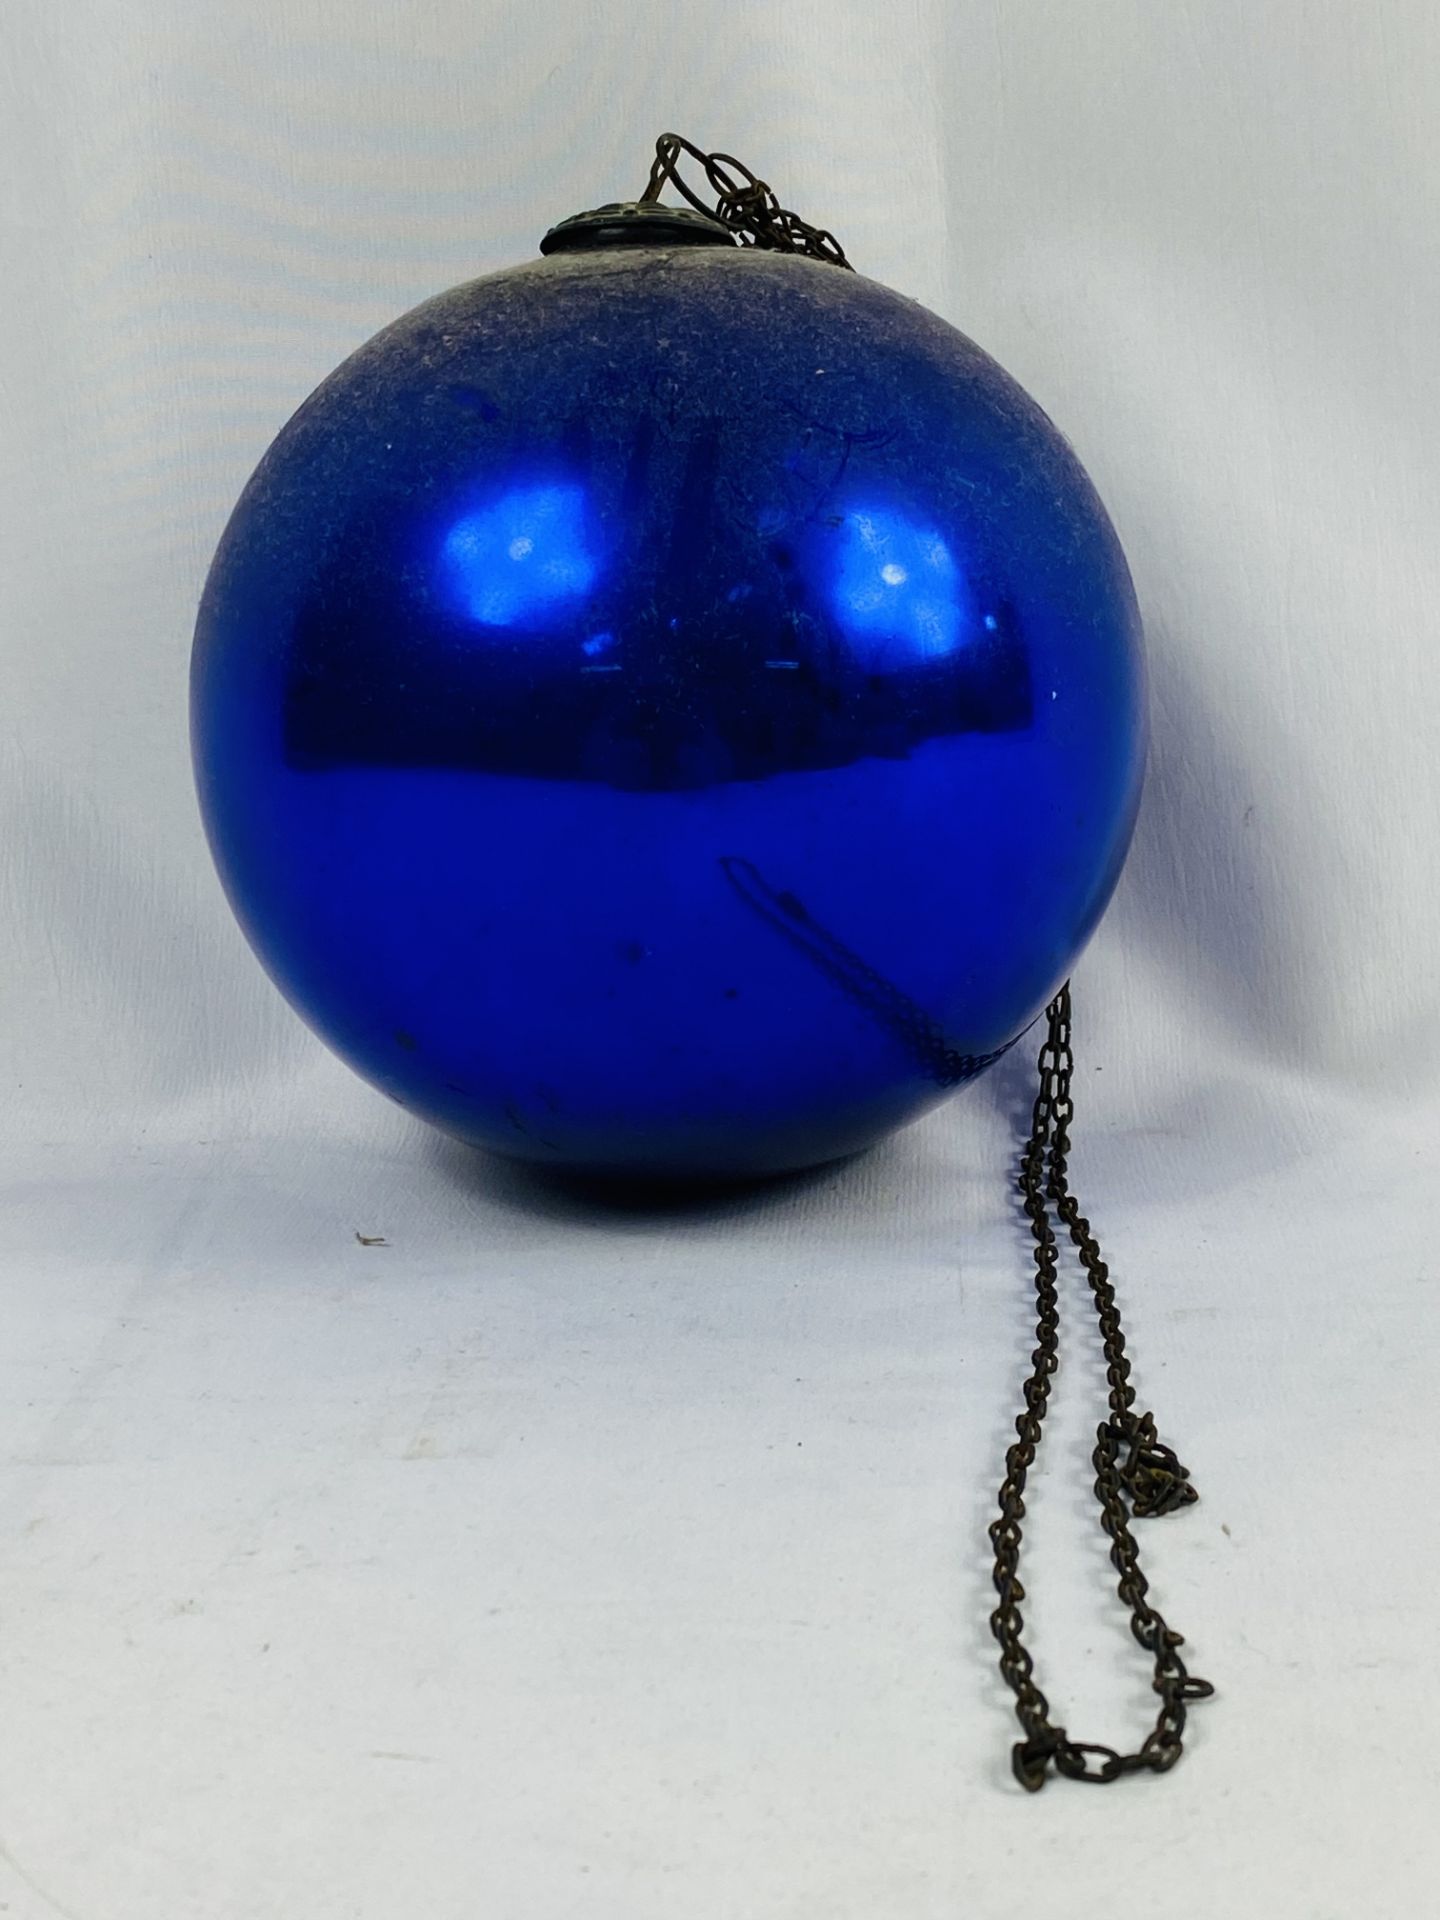 Blue mirrored glass witches ball - Image 6 of 6